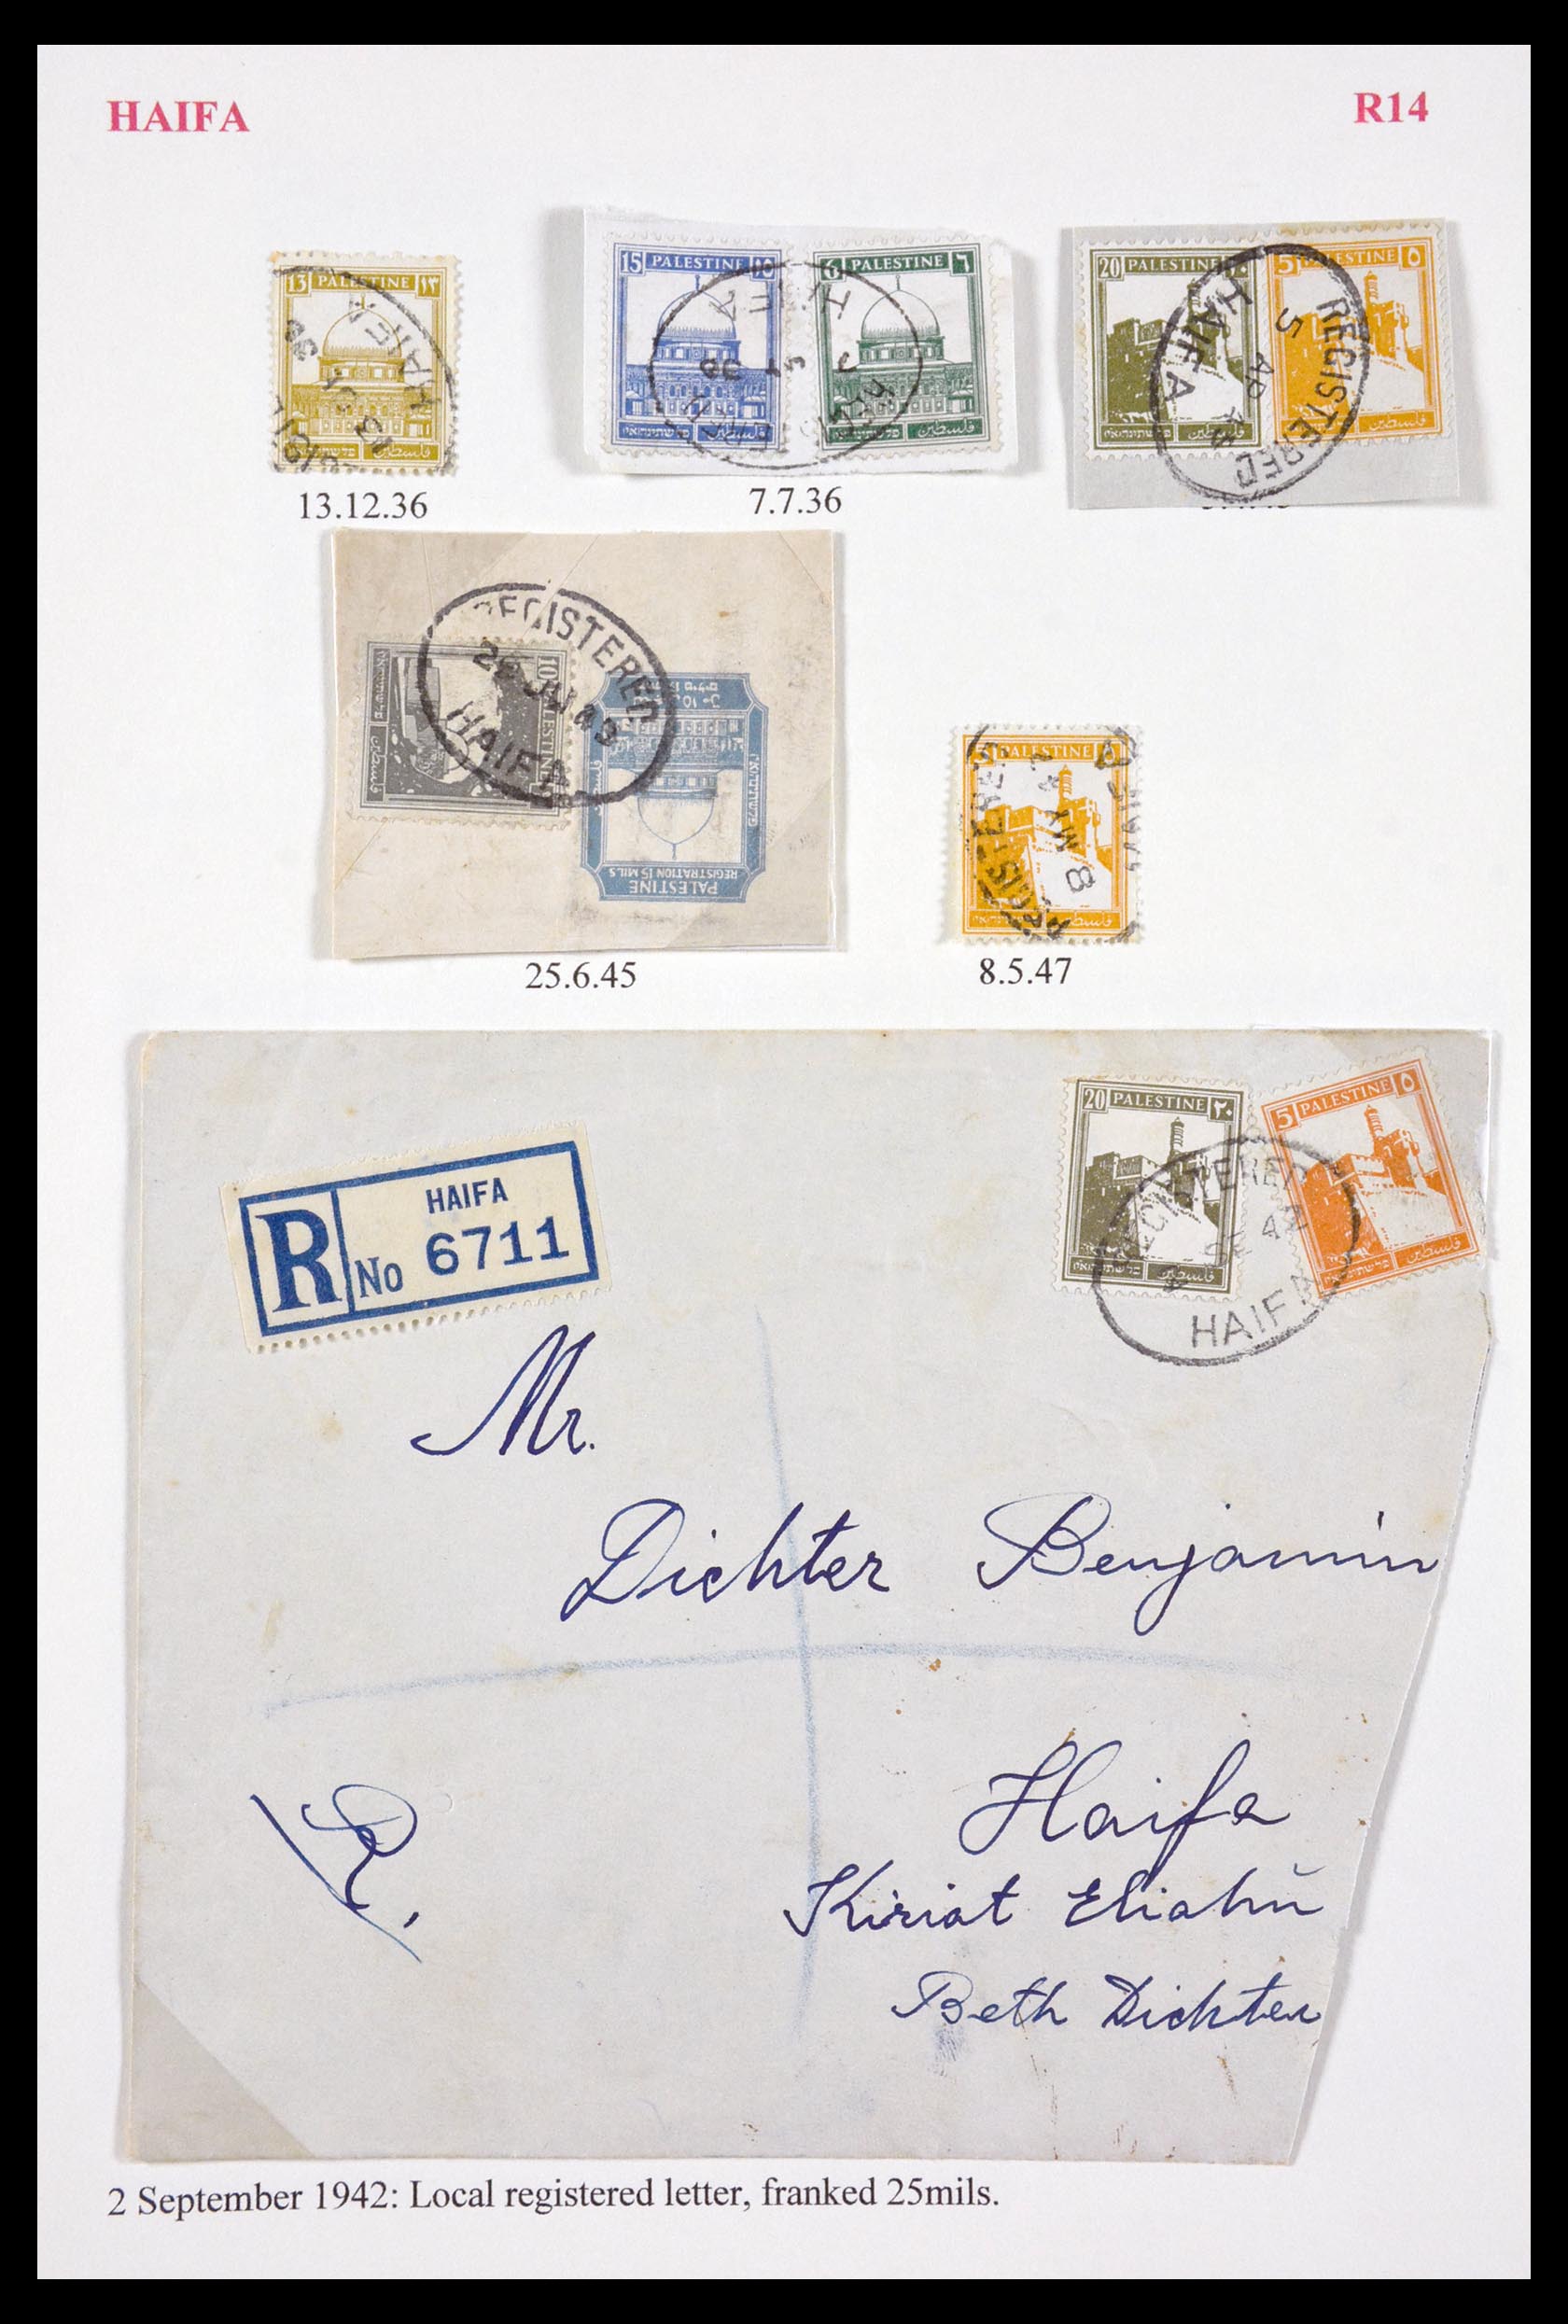 29588 072 - 29588 Palestine covers and cancels 1919-1948.